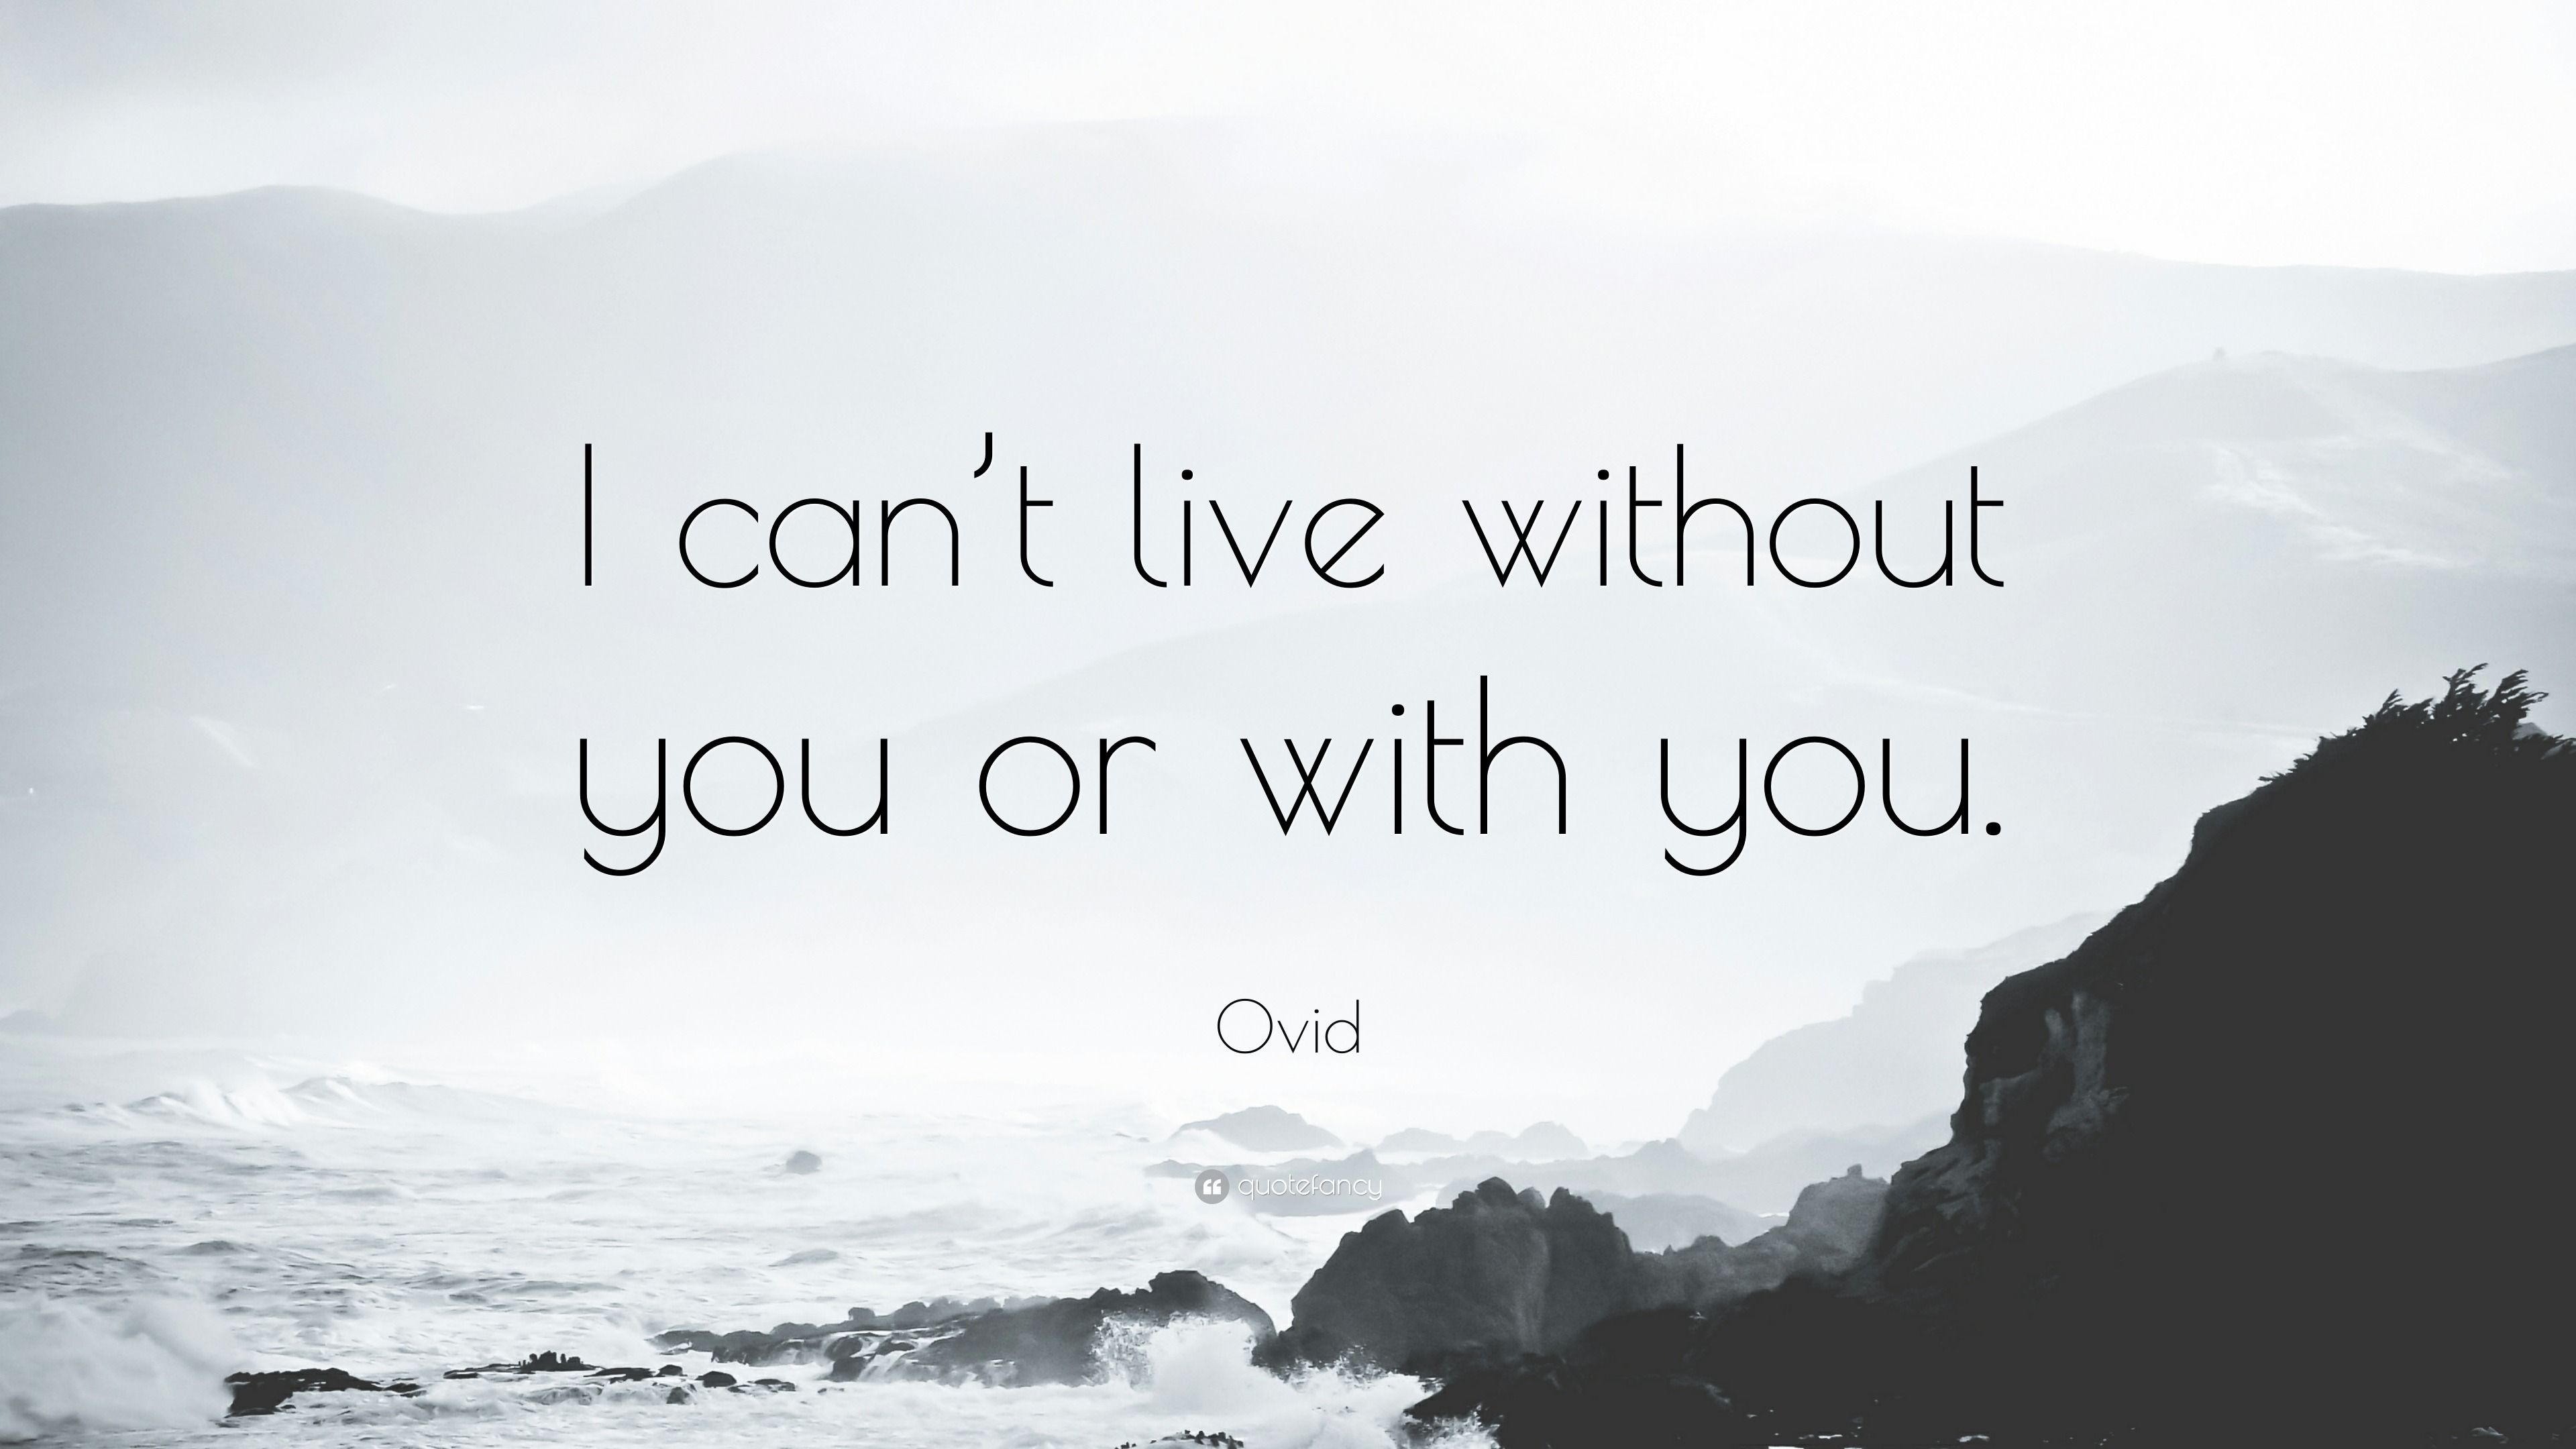 i can neither live with you nor without you